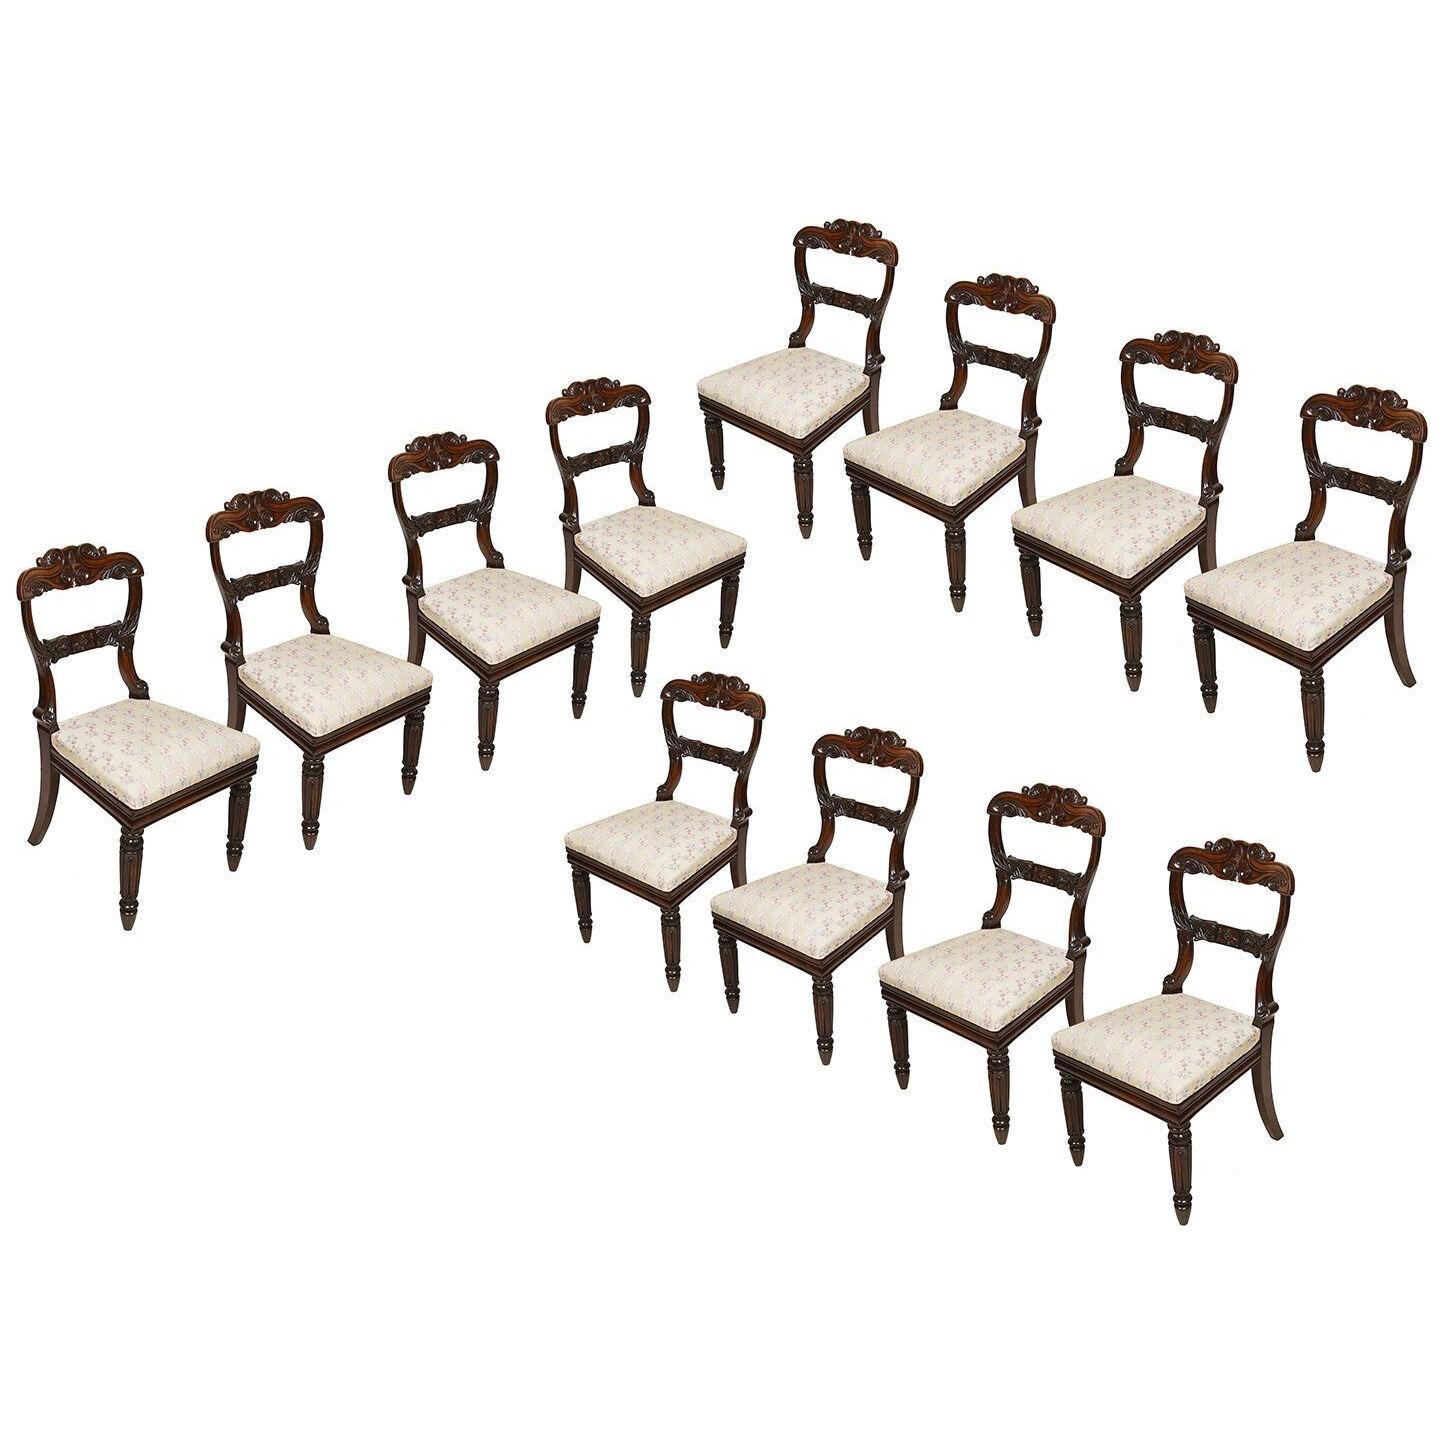 Set of 12 late Regency period dining chairs, circa 1830